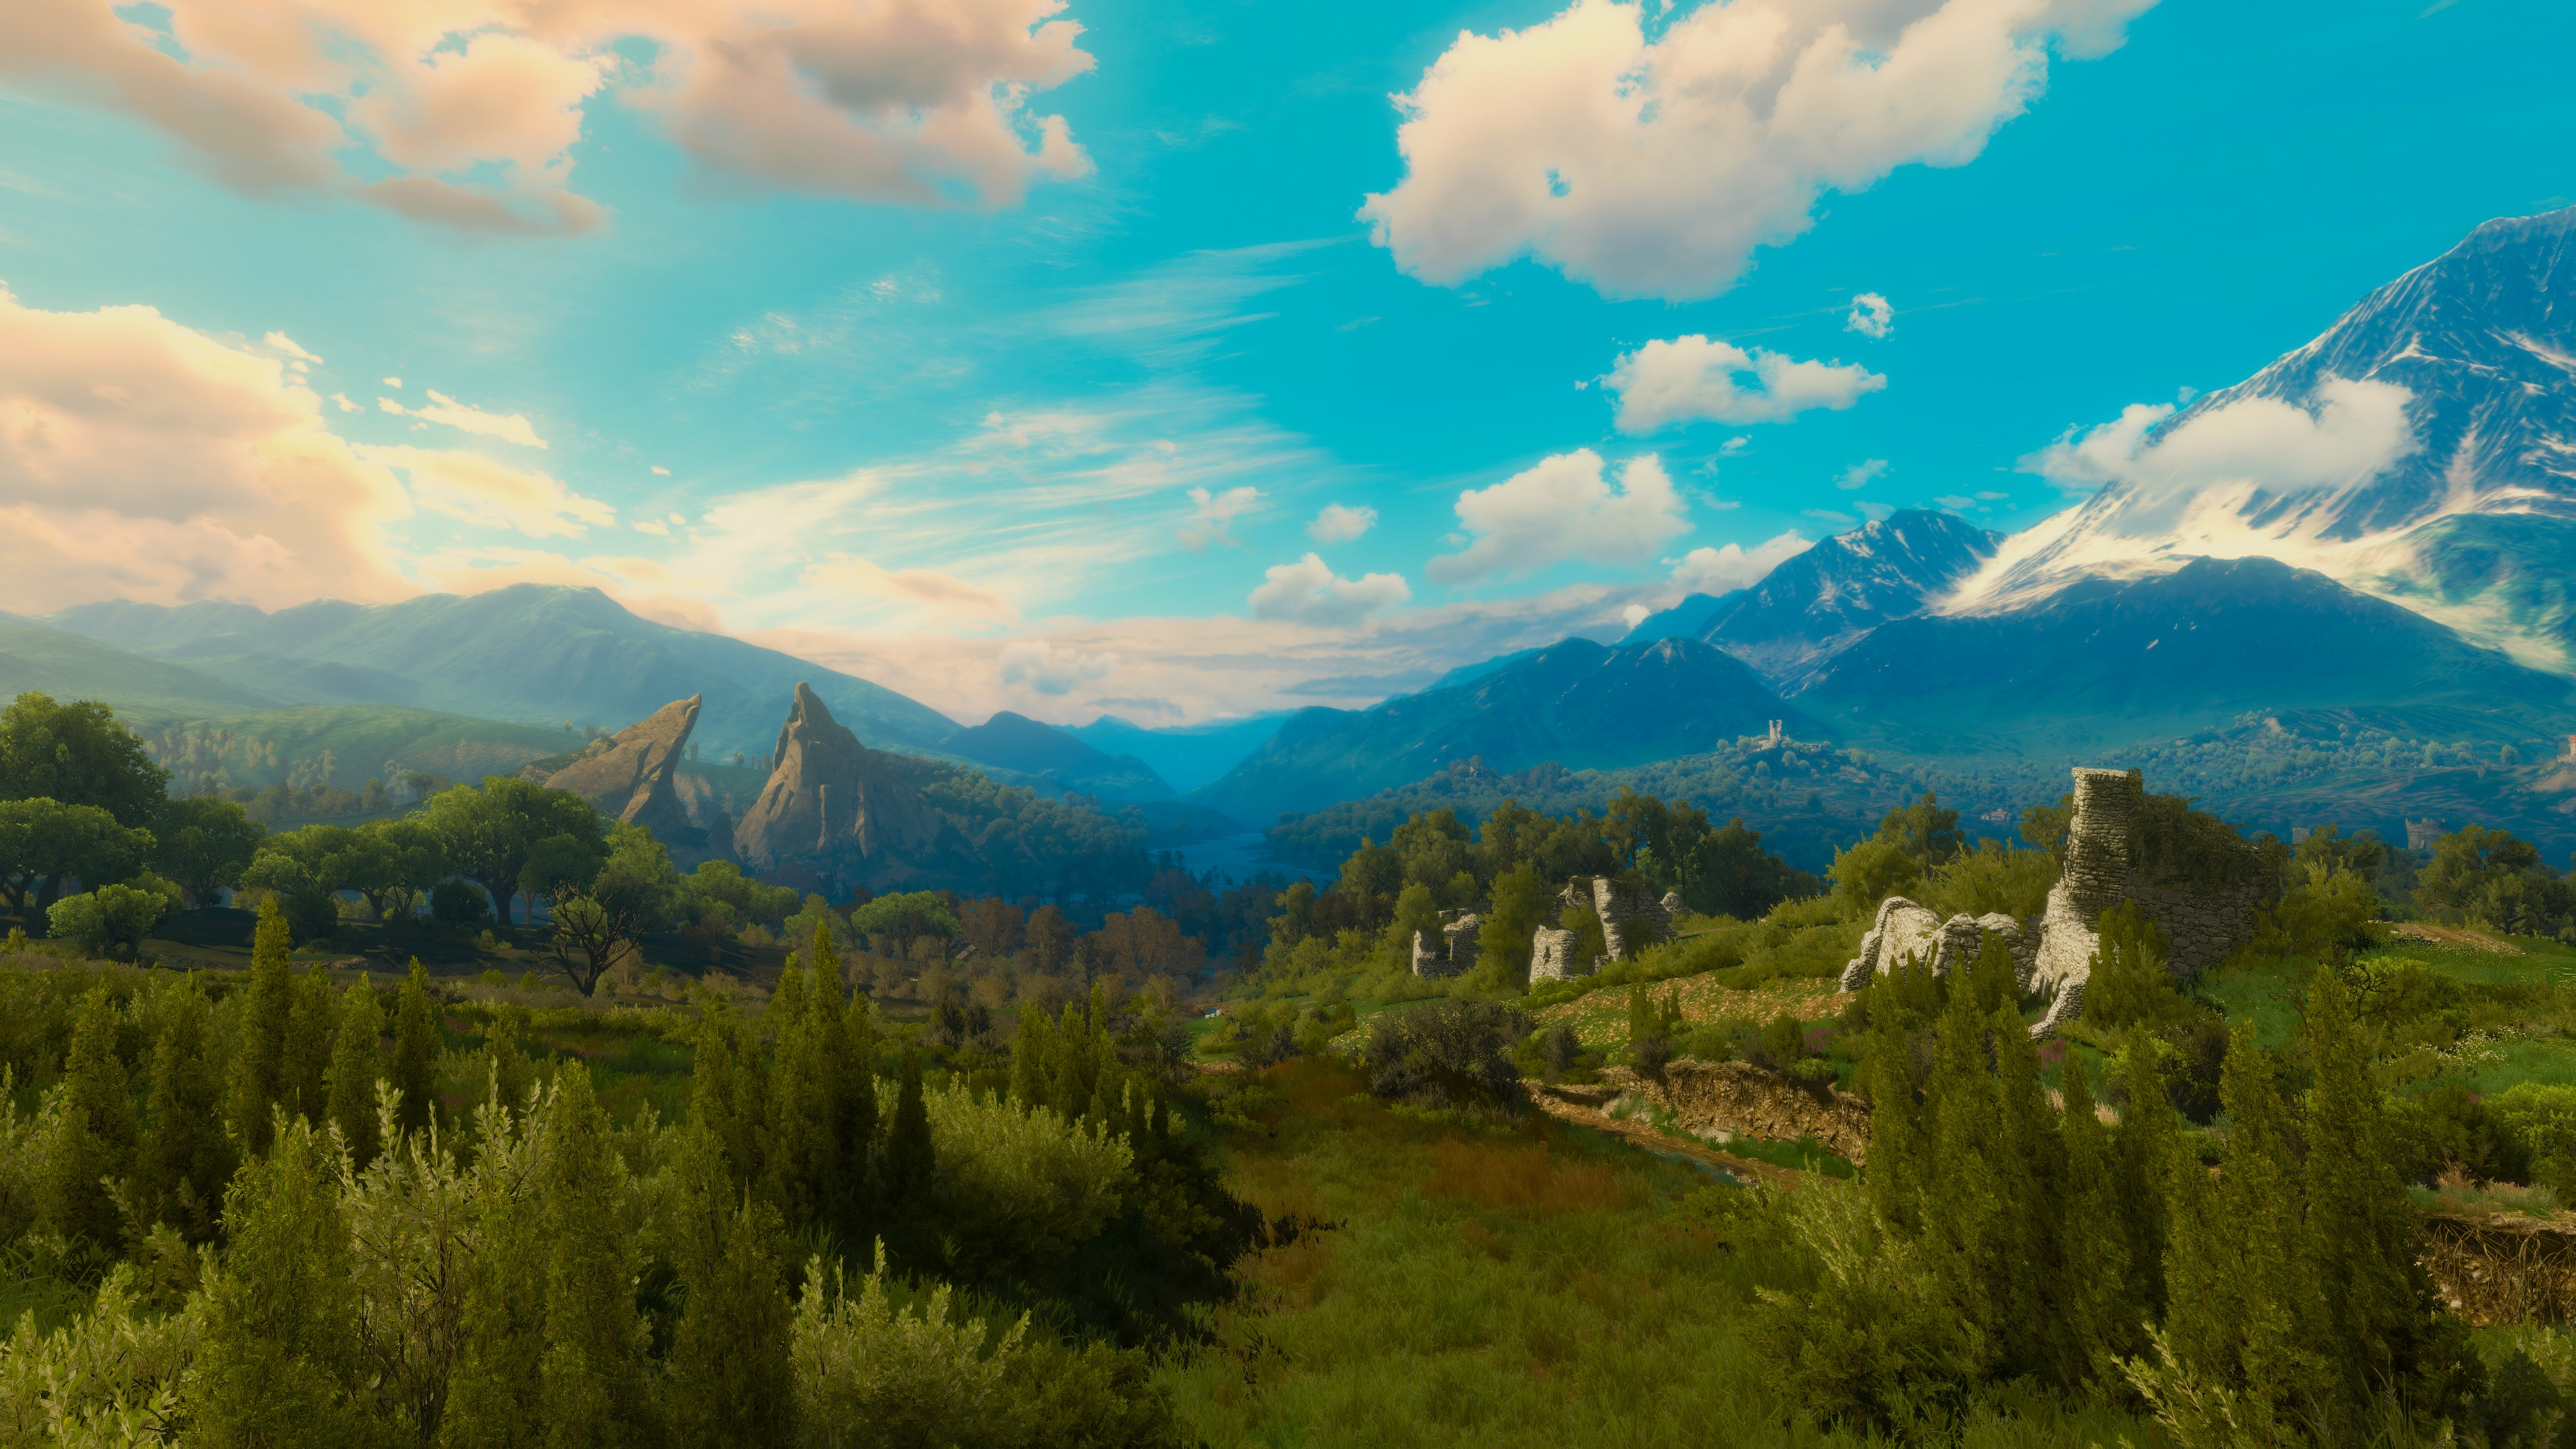 The Witcher 3 Wild Hunt Screen Shot PC Gaming Tussent Landscape The Witcher 3840x2160